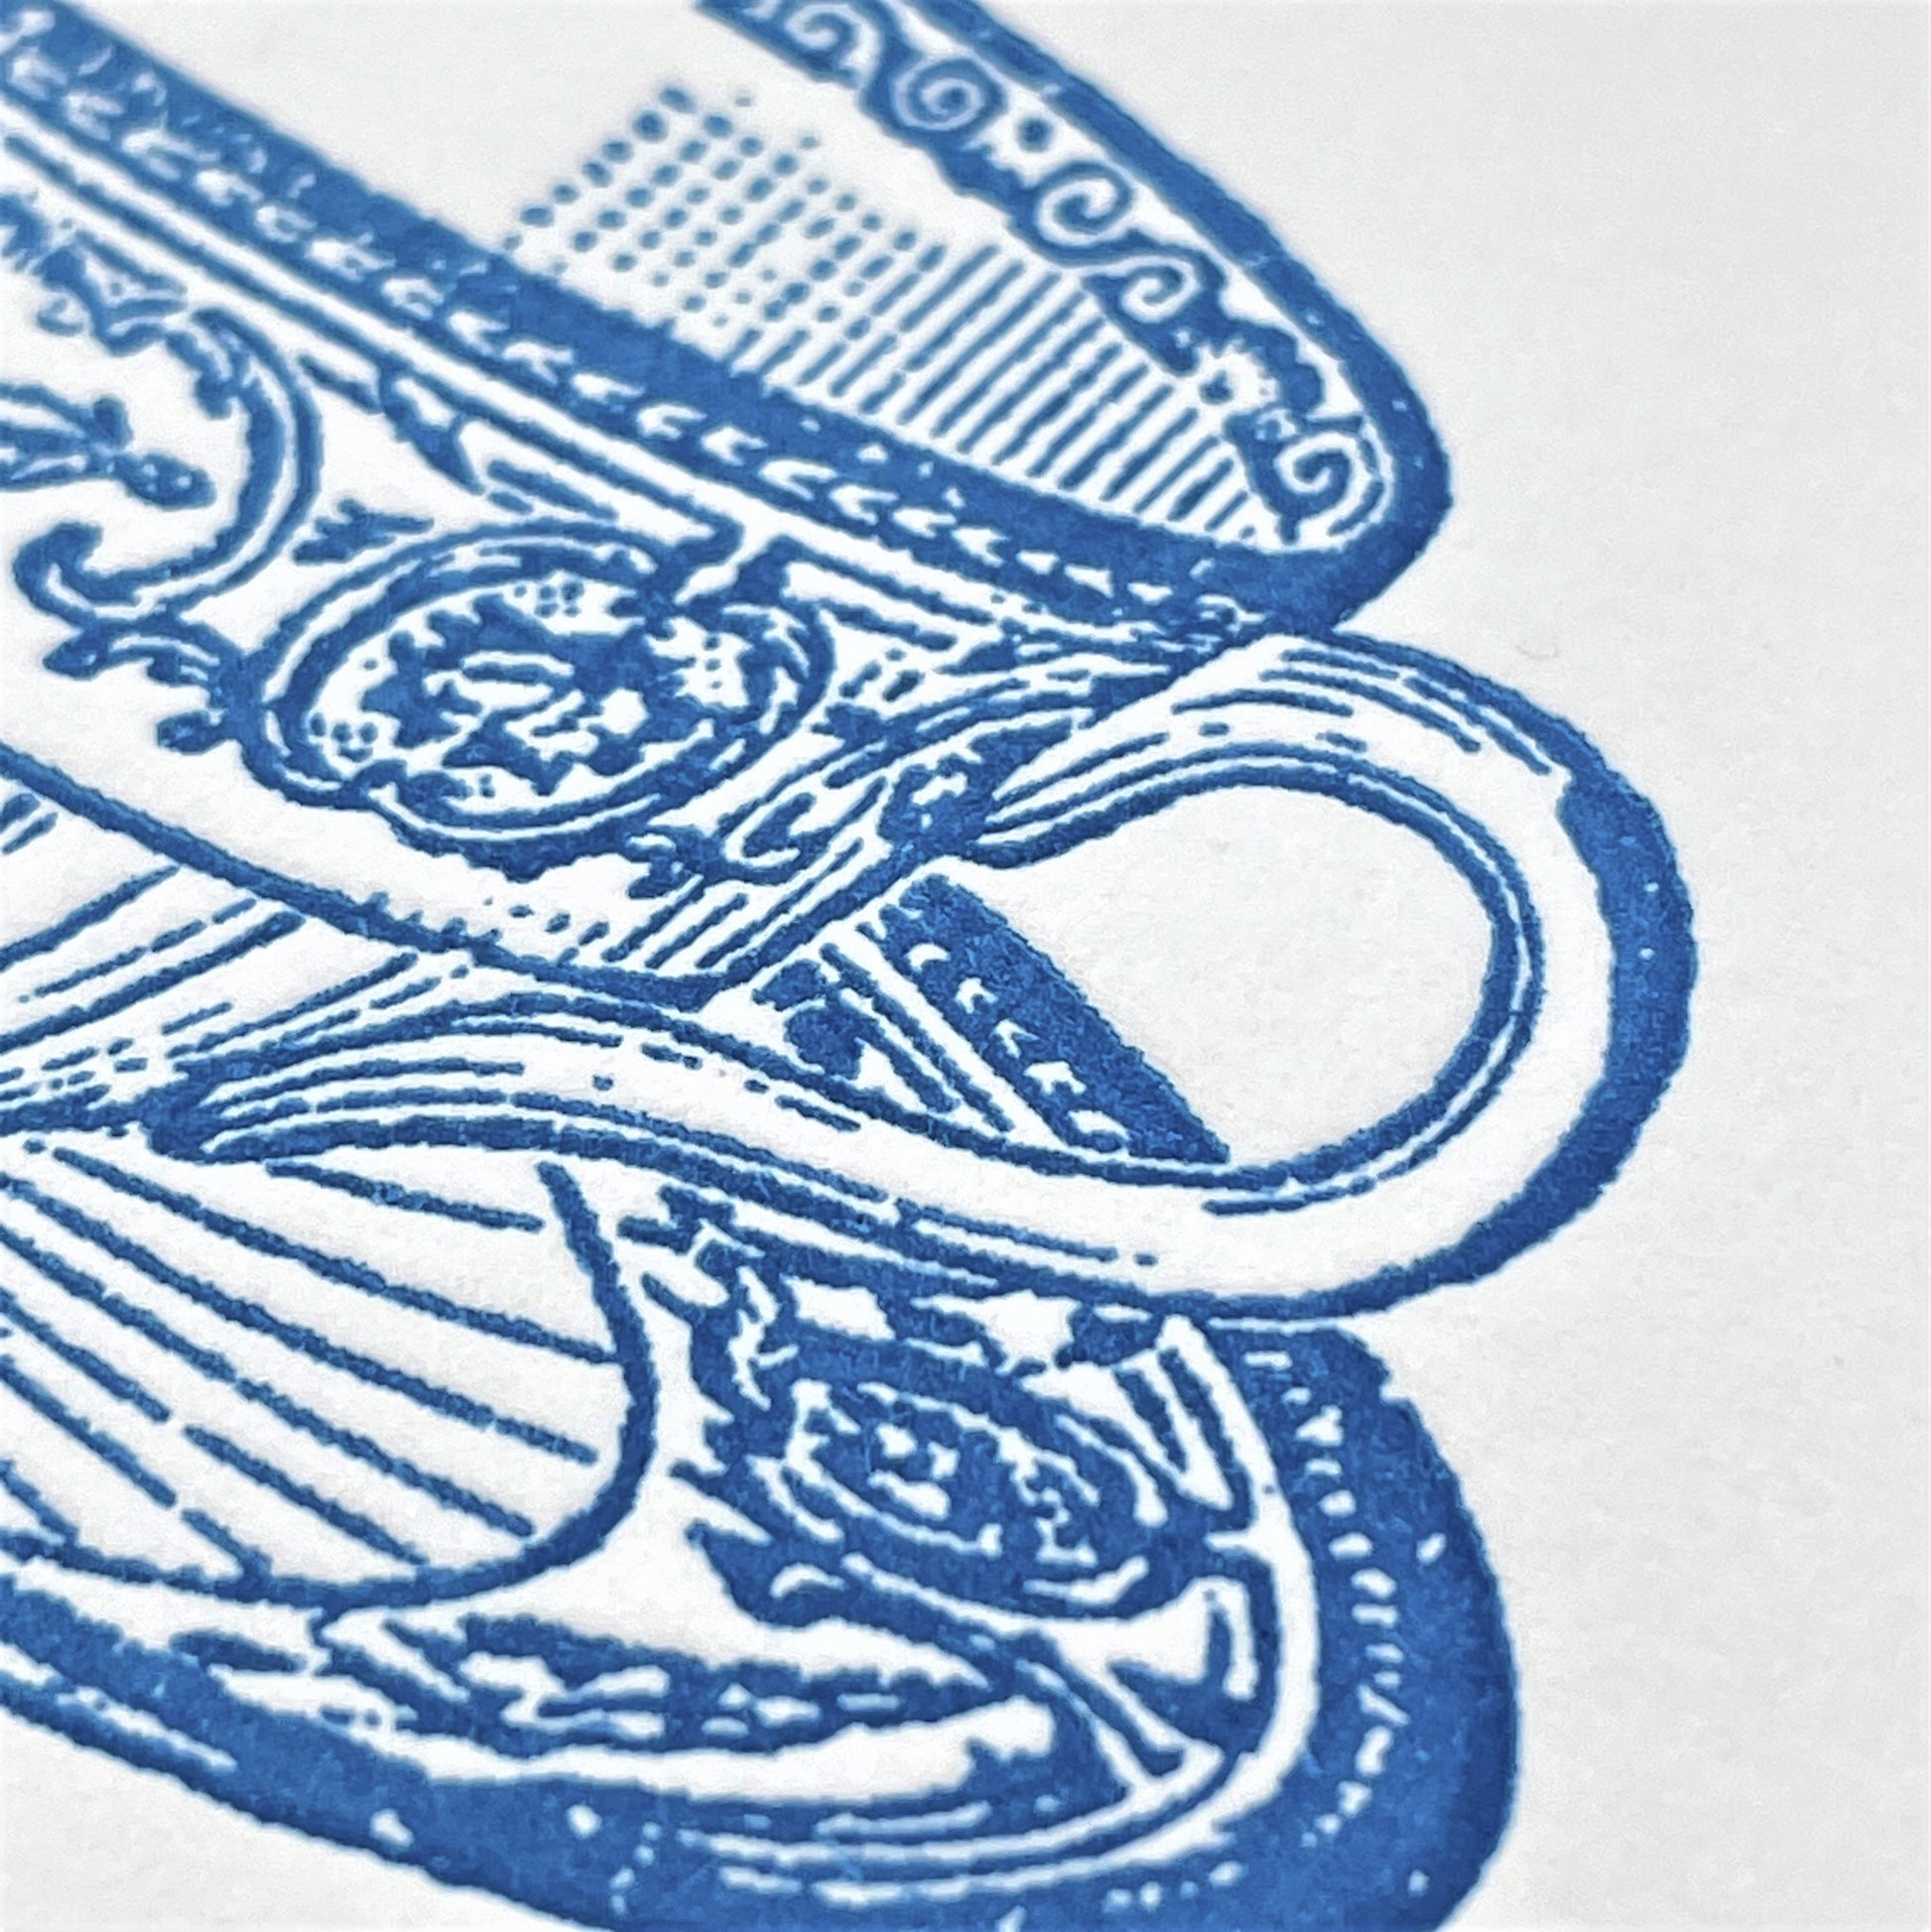 letterpress greetings card of a drawing of a wedgewood teacup and saucer, blue ink on white, close-up